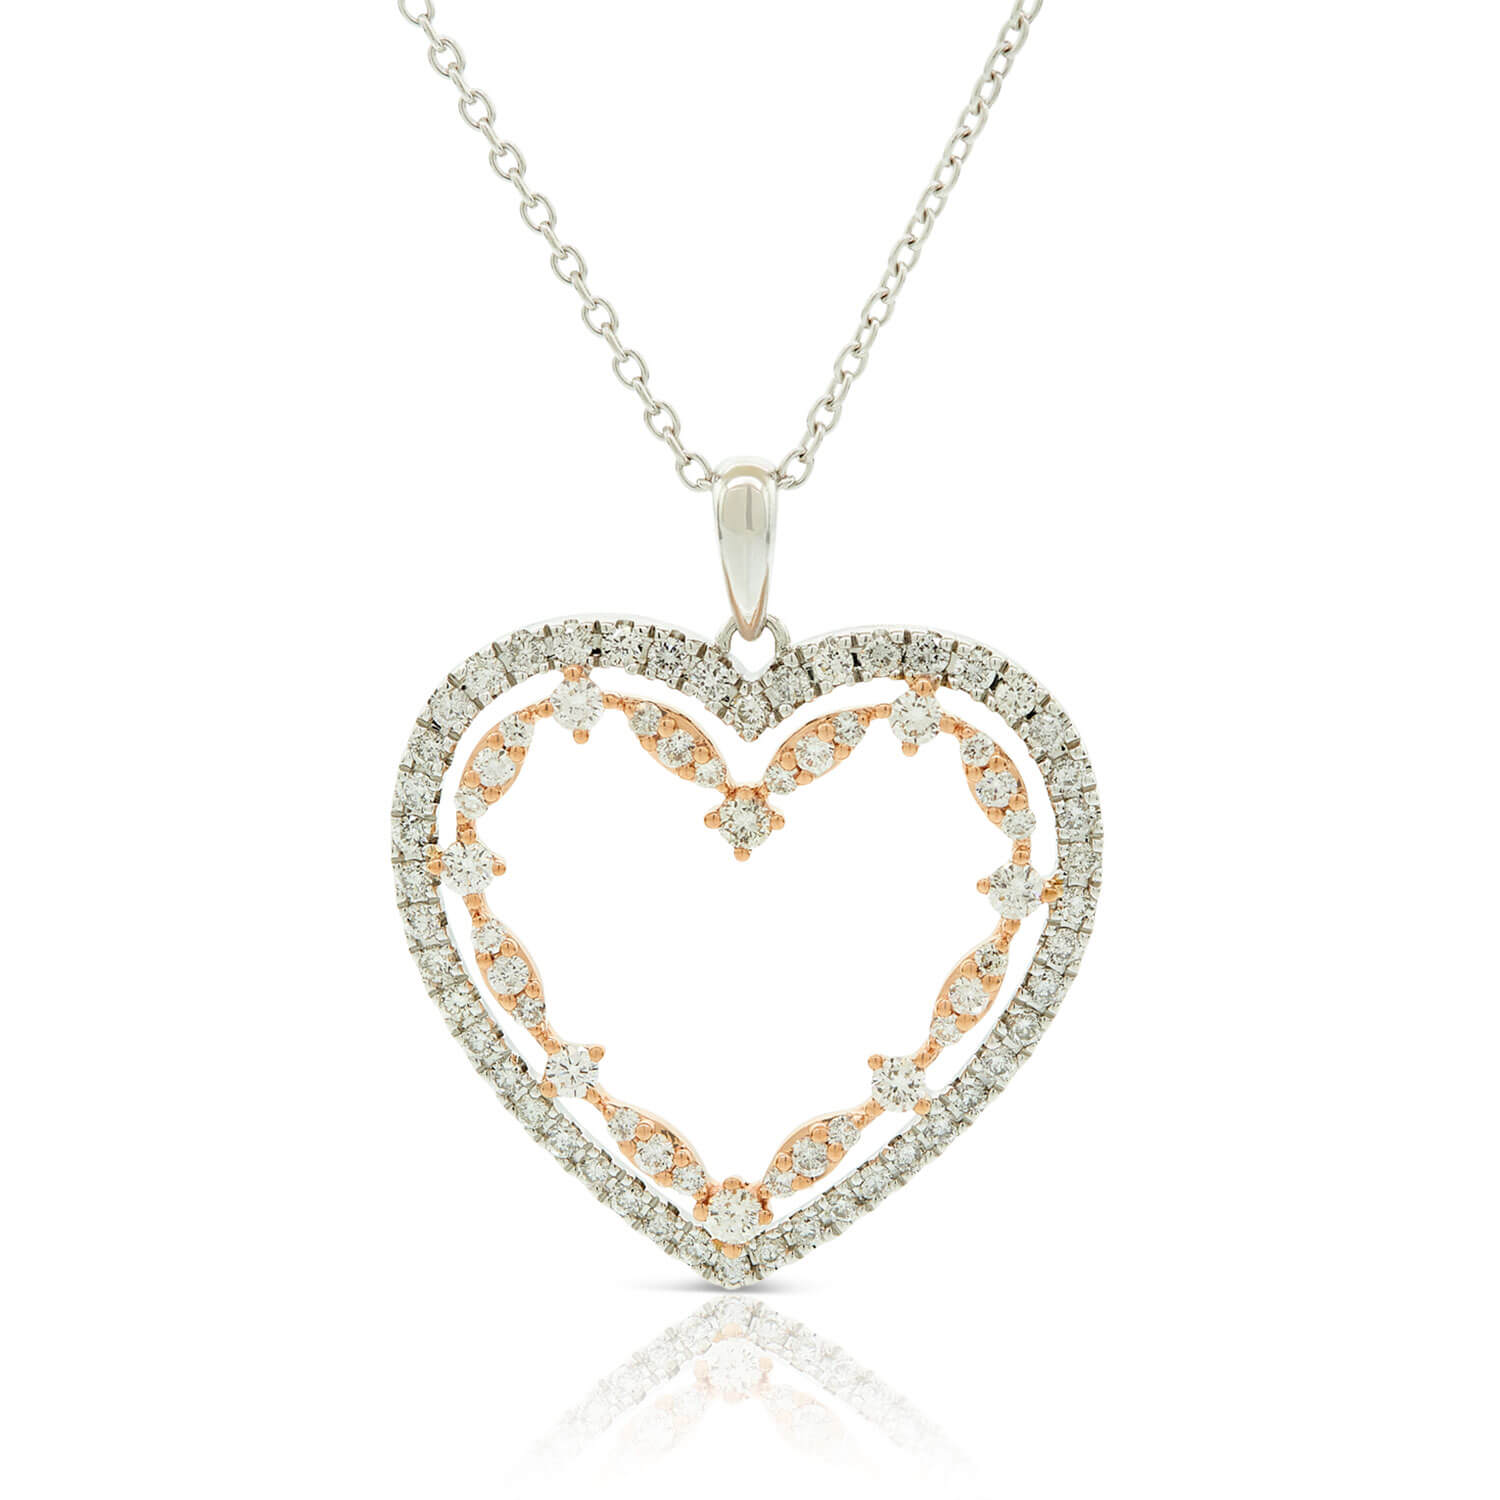 Beautiful White and yellow gold 14K 14K Two-tone Polished Floral Design Heart Pendant 